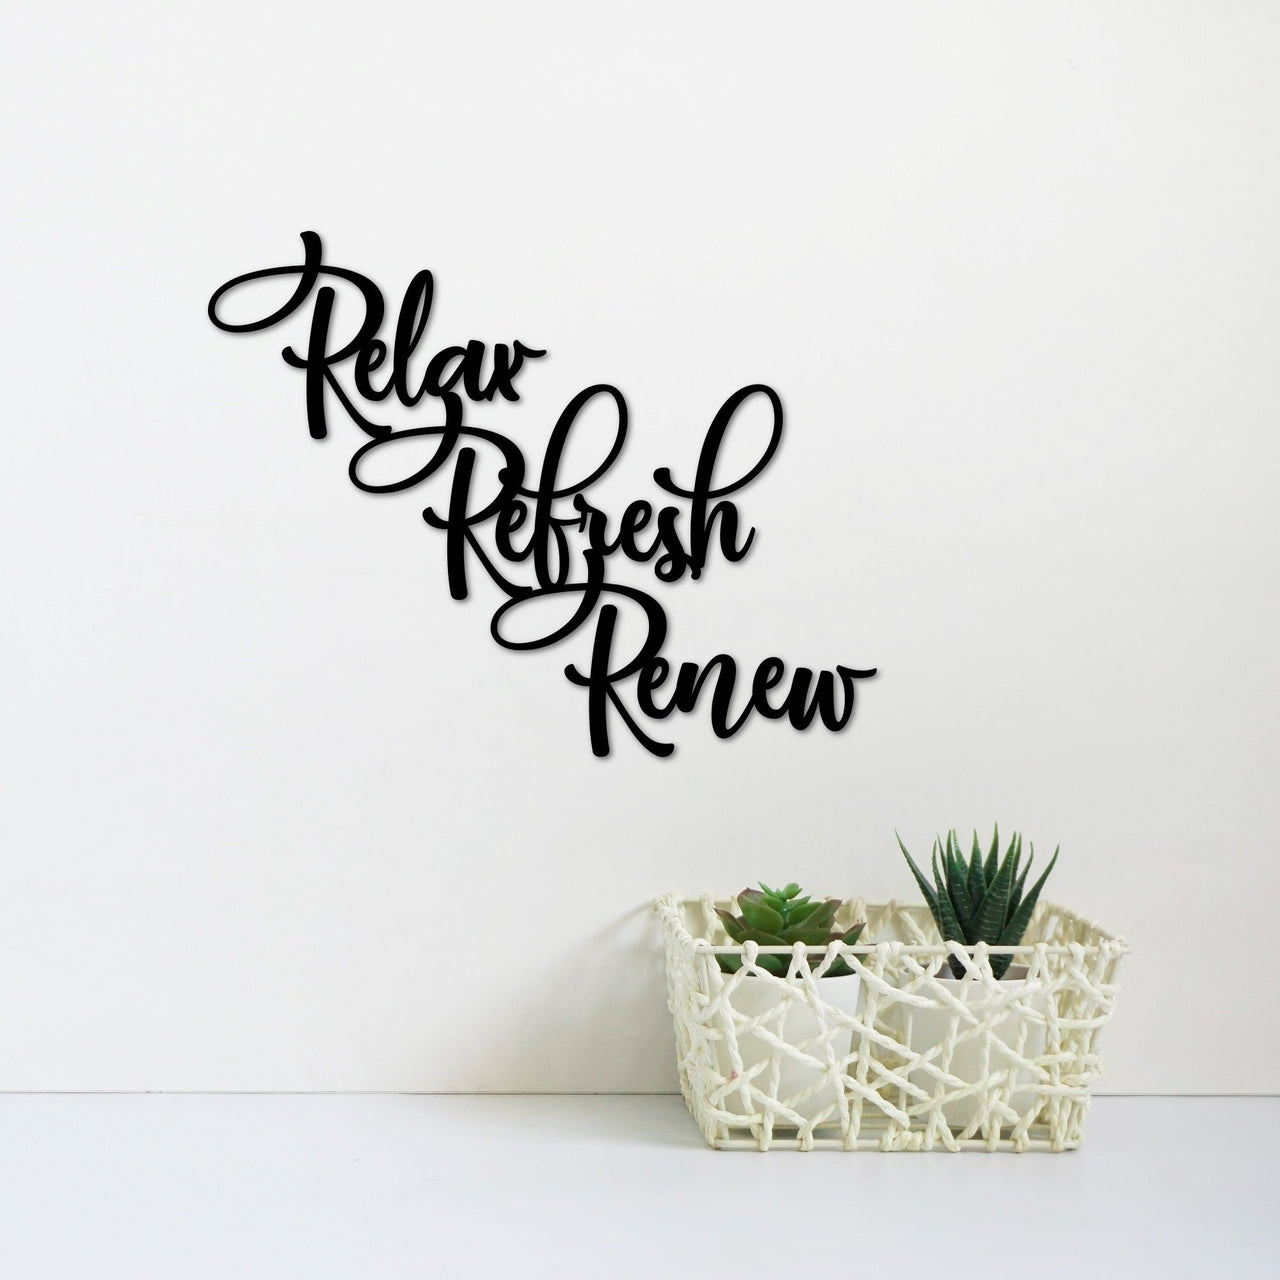 Relax Refresh Renew Metal Wall Sign | Bathroom Decor | Master Bedroom Sign | Gift for Wife, Mom or Girlfriend | Spa Sign Metal Art | Bath